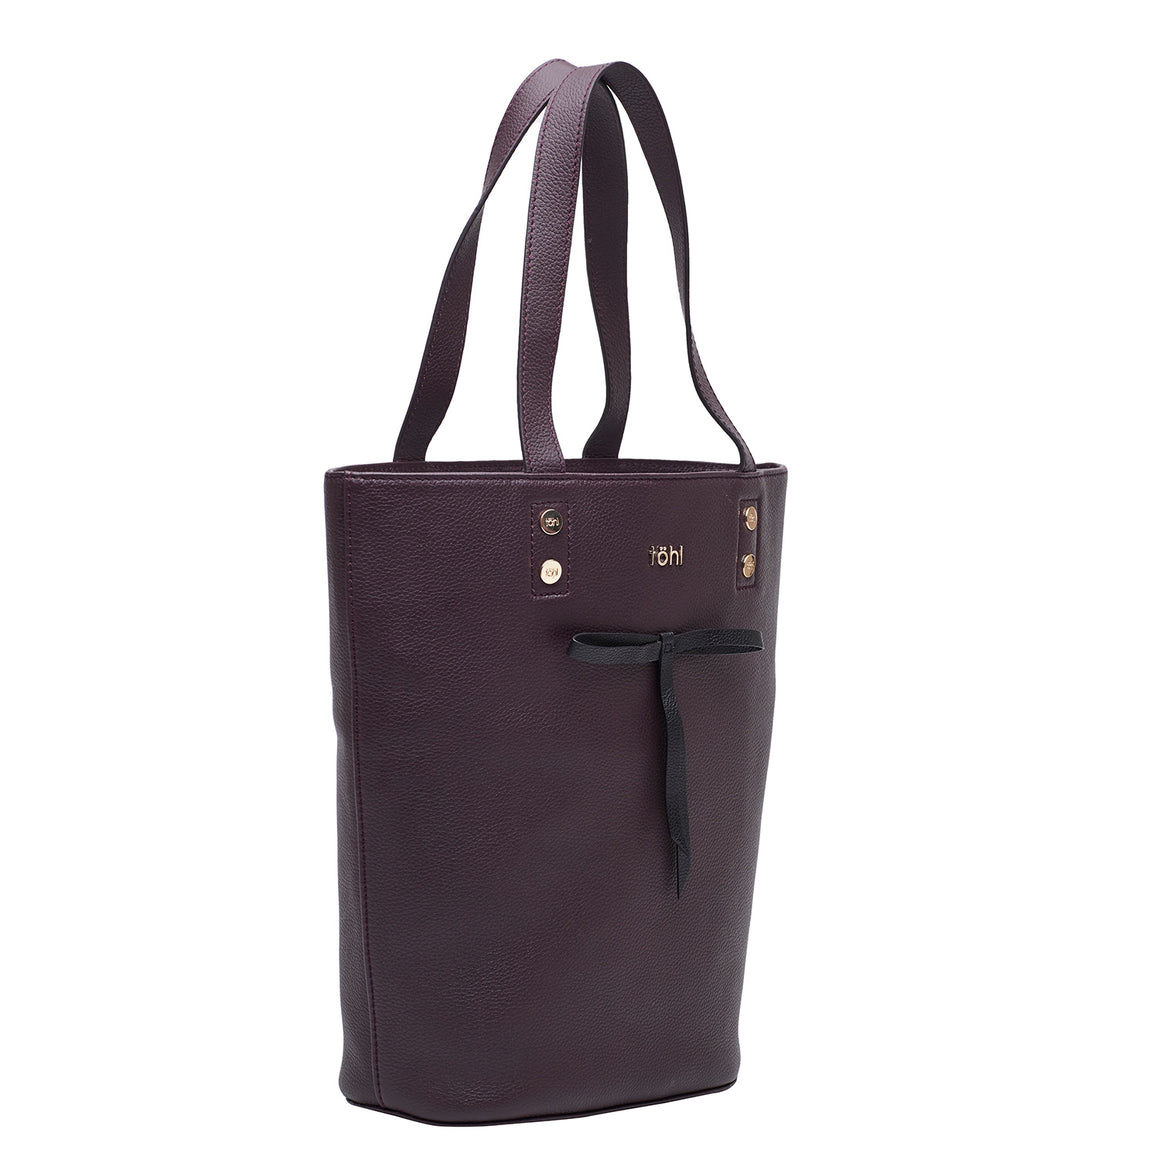 RUSSELL WOMEN'S TOTE BAG - PLUM